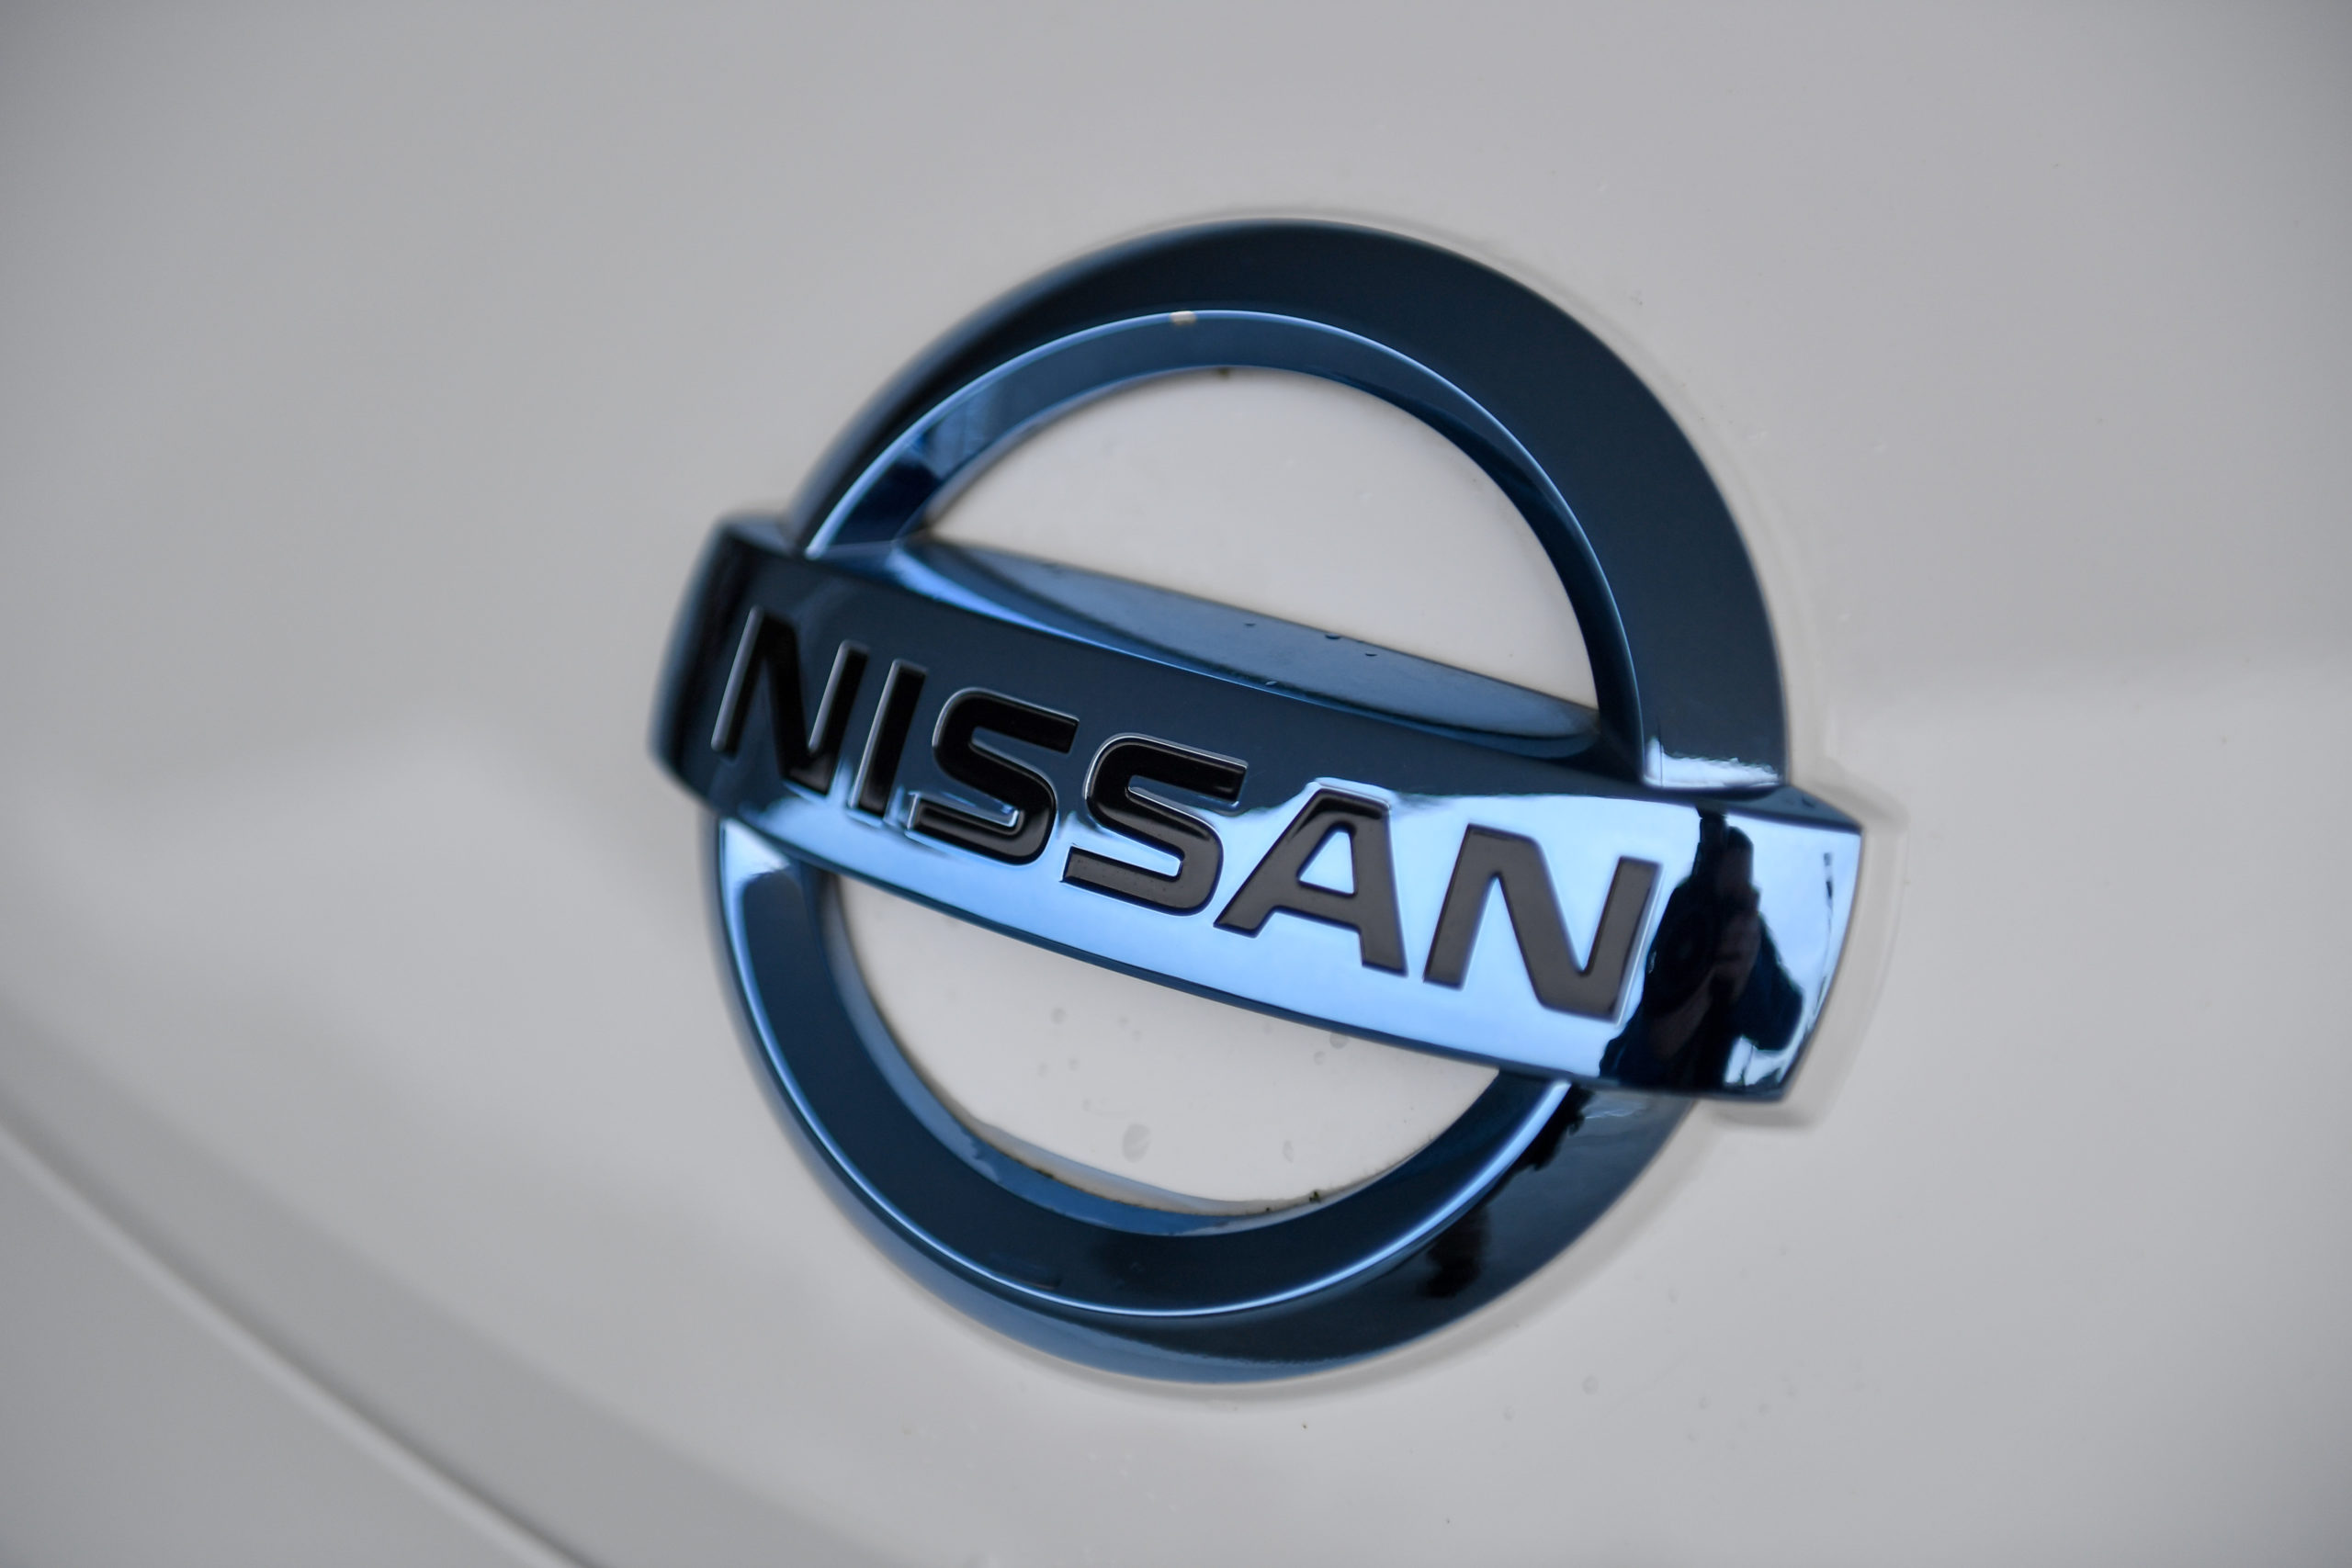 Big move from Nissan to save the Alliance